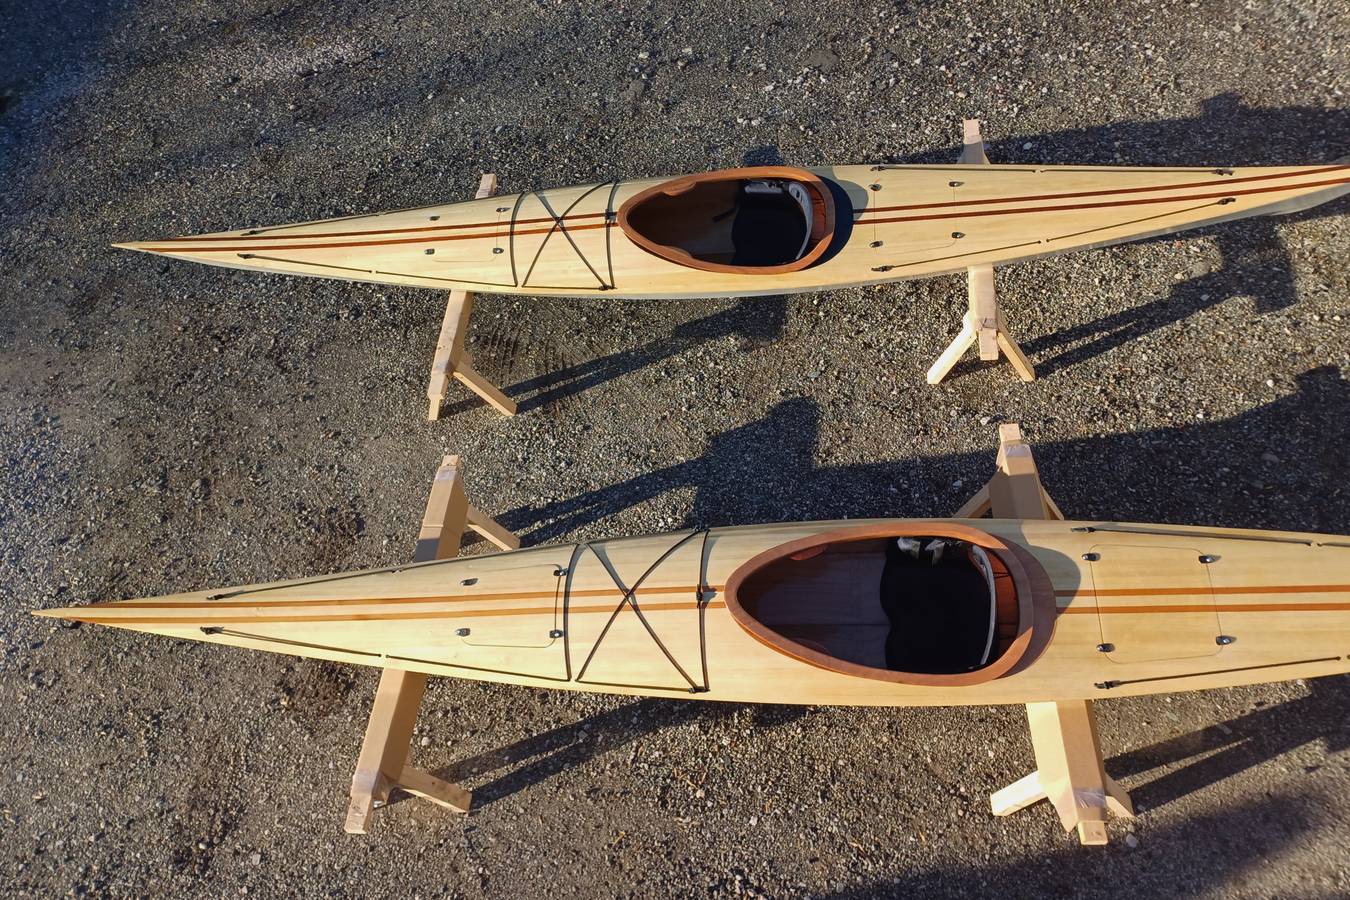 A pair of ready built Shearwater 17 Hybrid wooden kayaks